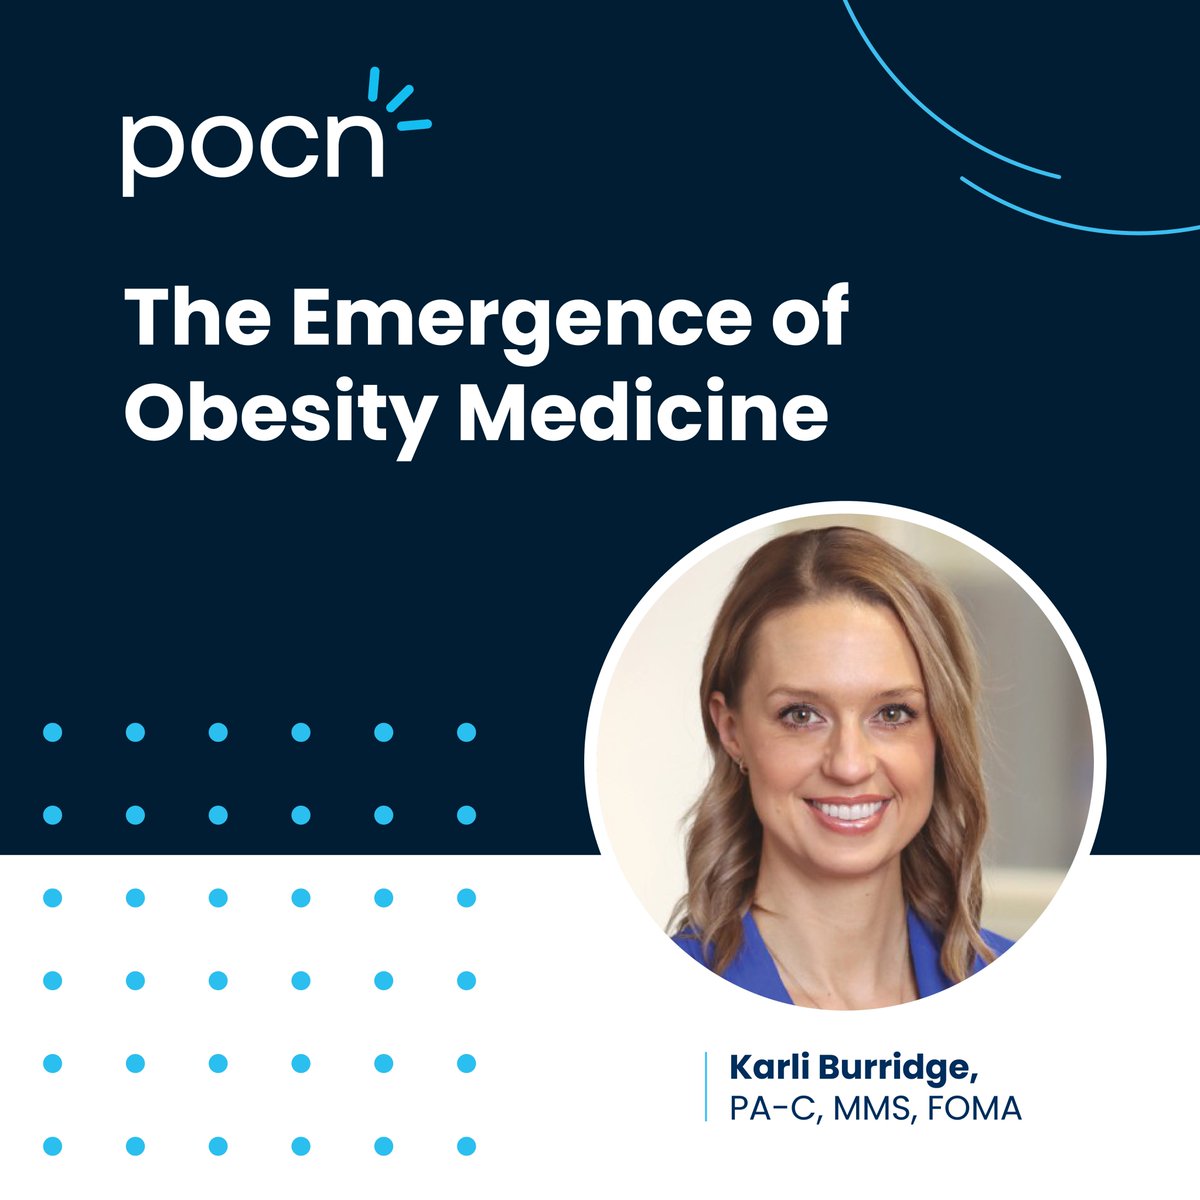 The CDC indicates 41.9% of Americans have obesity, which is becoming increasingly complex to manage. Karli Burridge, PA-C, MMS, FOMA, talks about how obesity impacts the way NPs & PAs treat a variety of associated conditions & comorbidities. Watch now: pocnplus.com/video/emergenc…